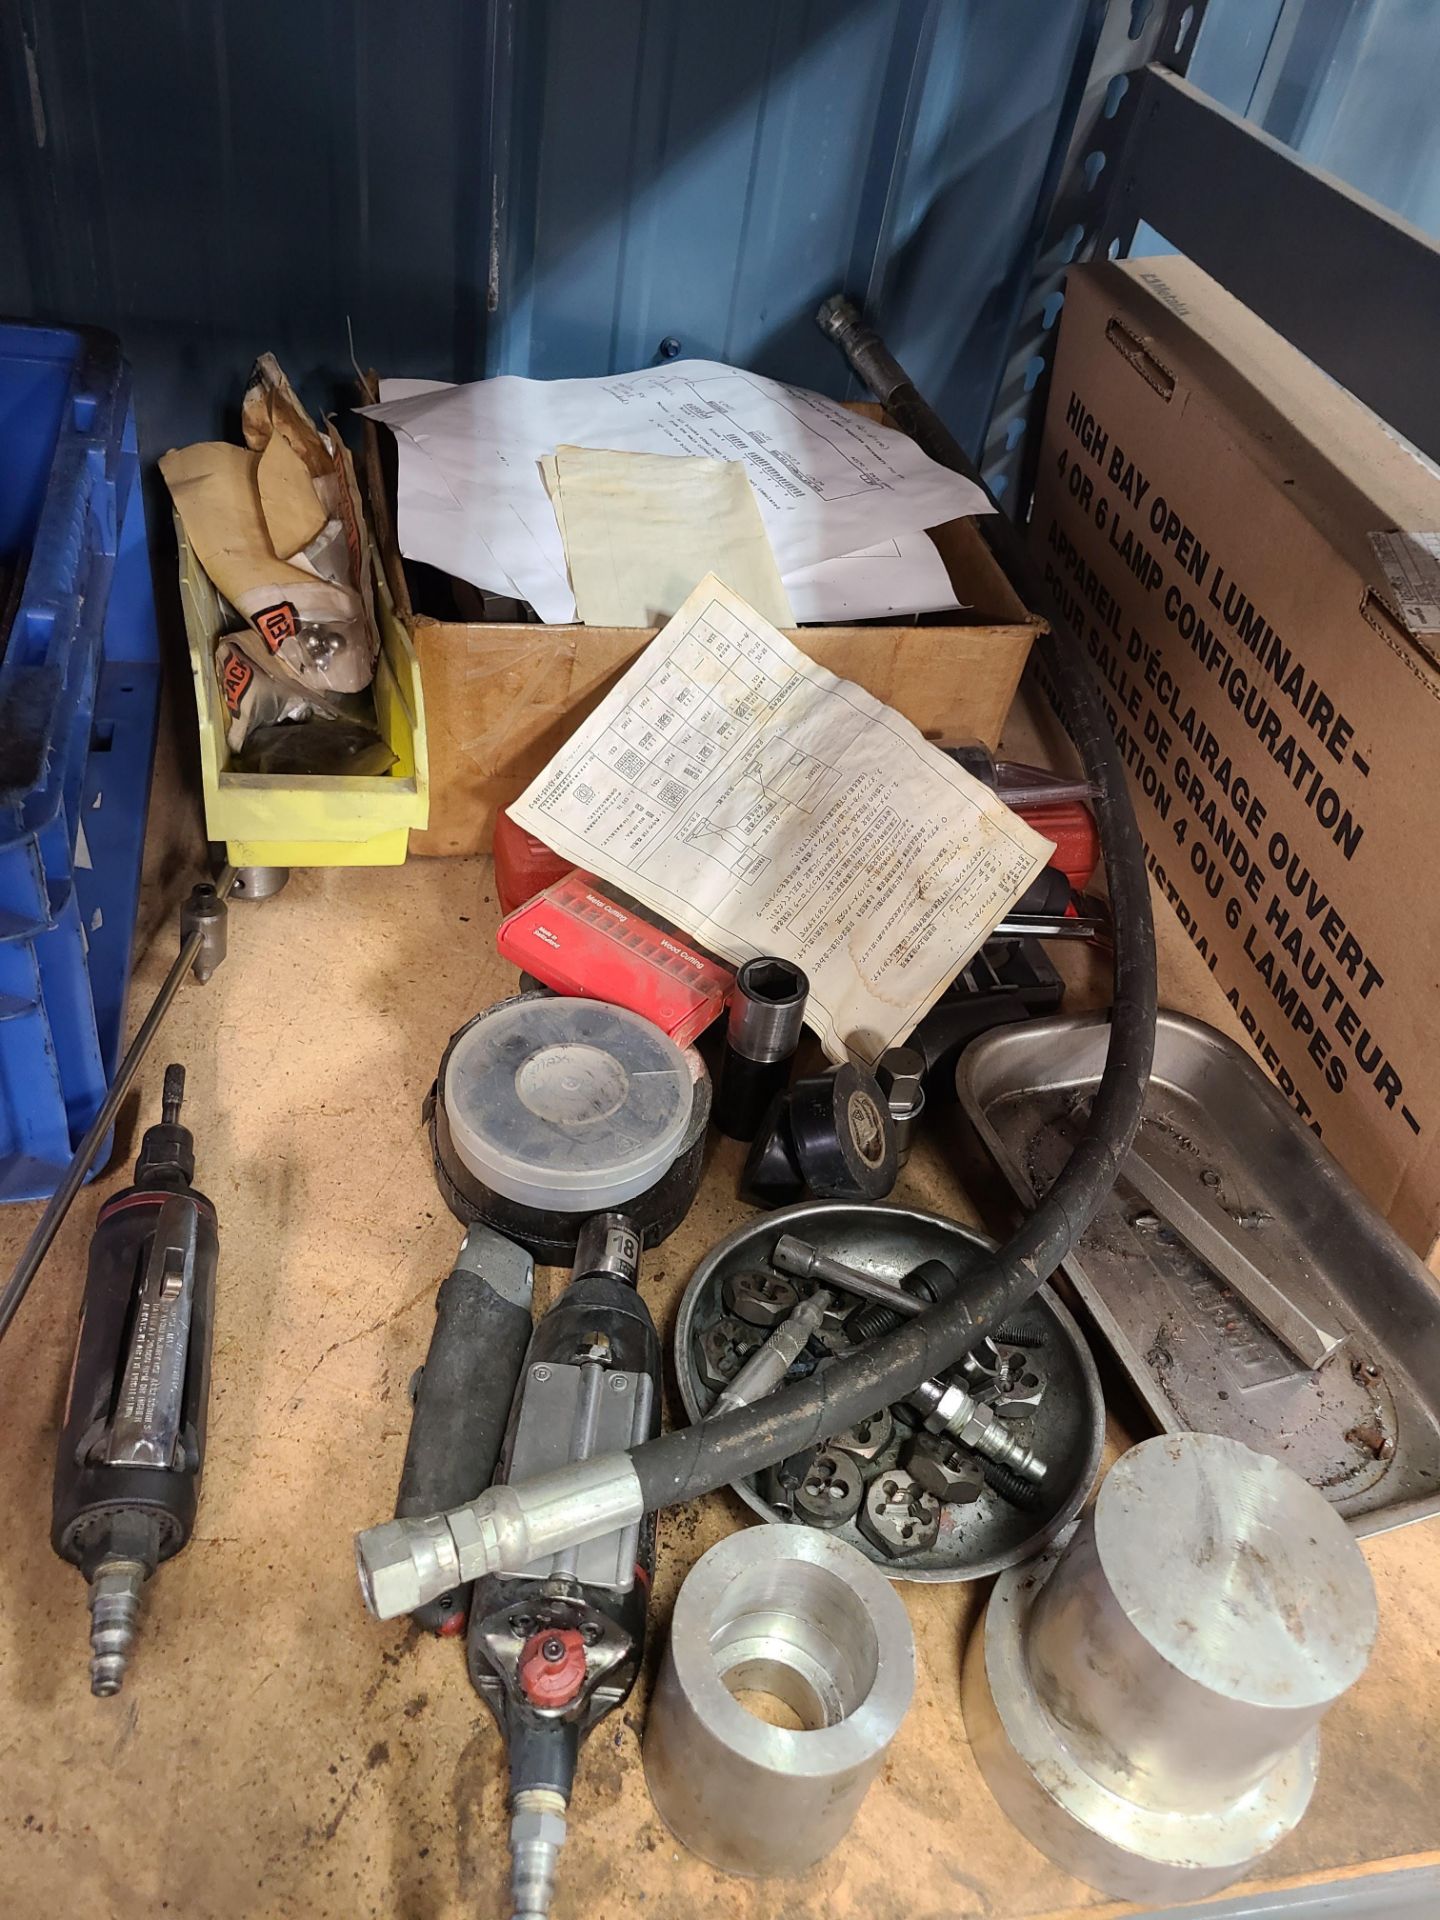 LOT OF MISC TOOLS (SCREWDRIVERS; GRINDER; GRINDING WHEELS; PNEUMATIC TOOLS; SAW) - Image 4 of 4